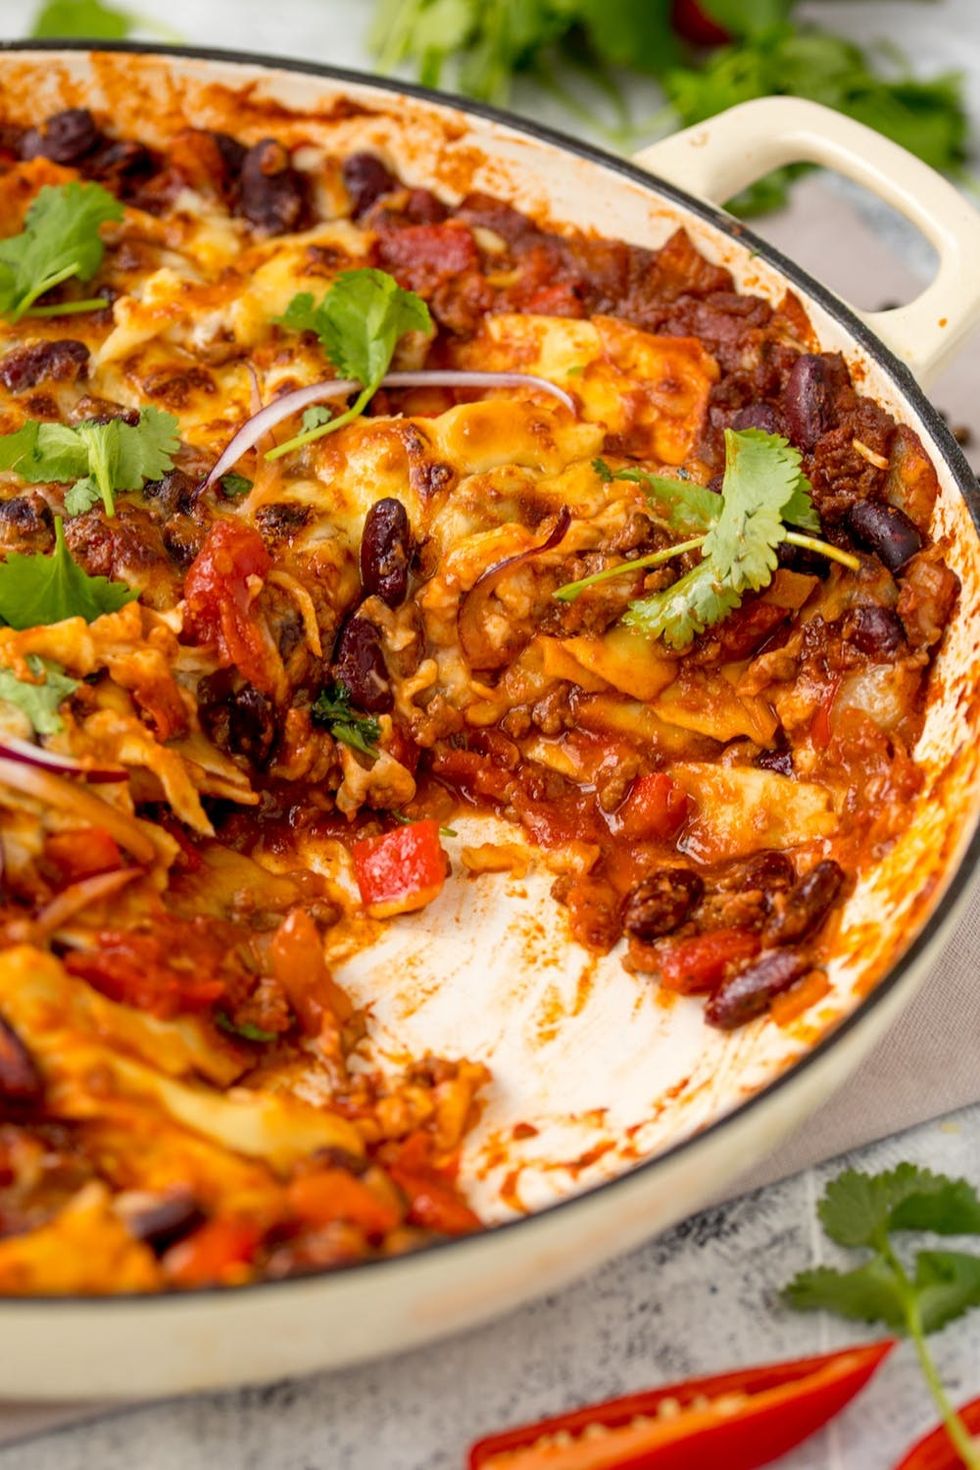 Only 30 Minutes Remain Between You and This Beef Chili Skillet Lasagna ...